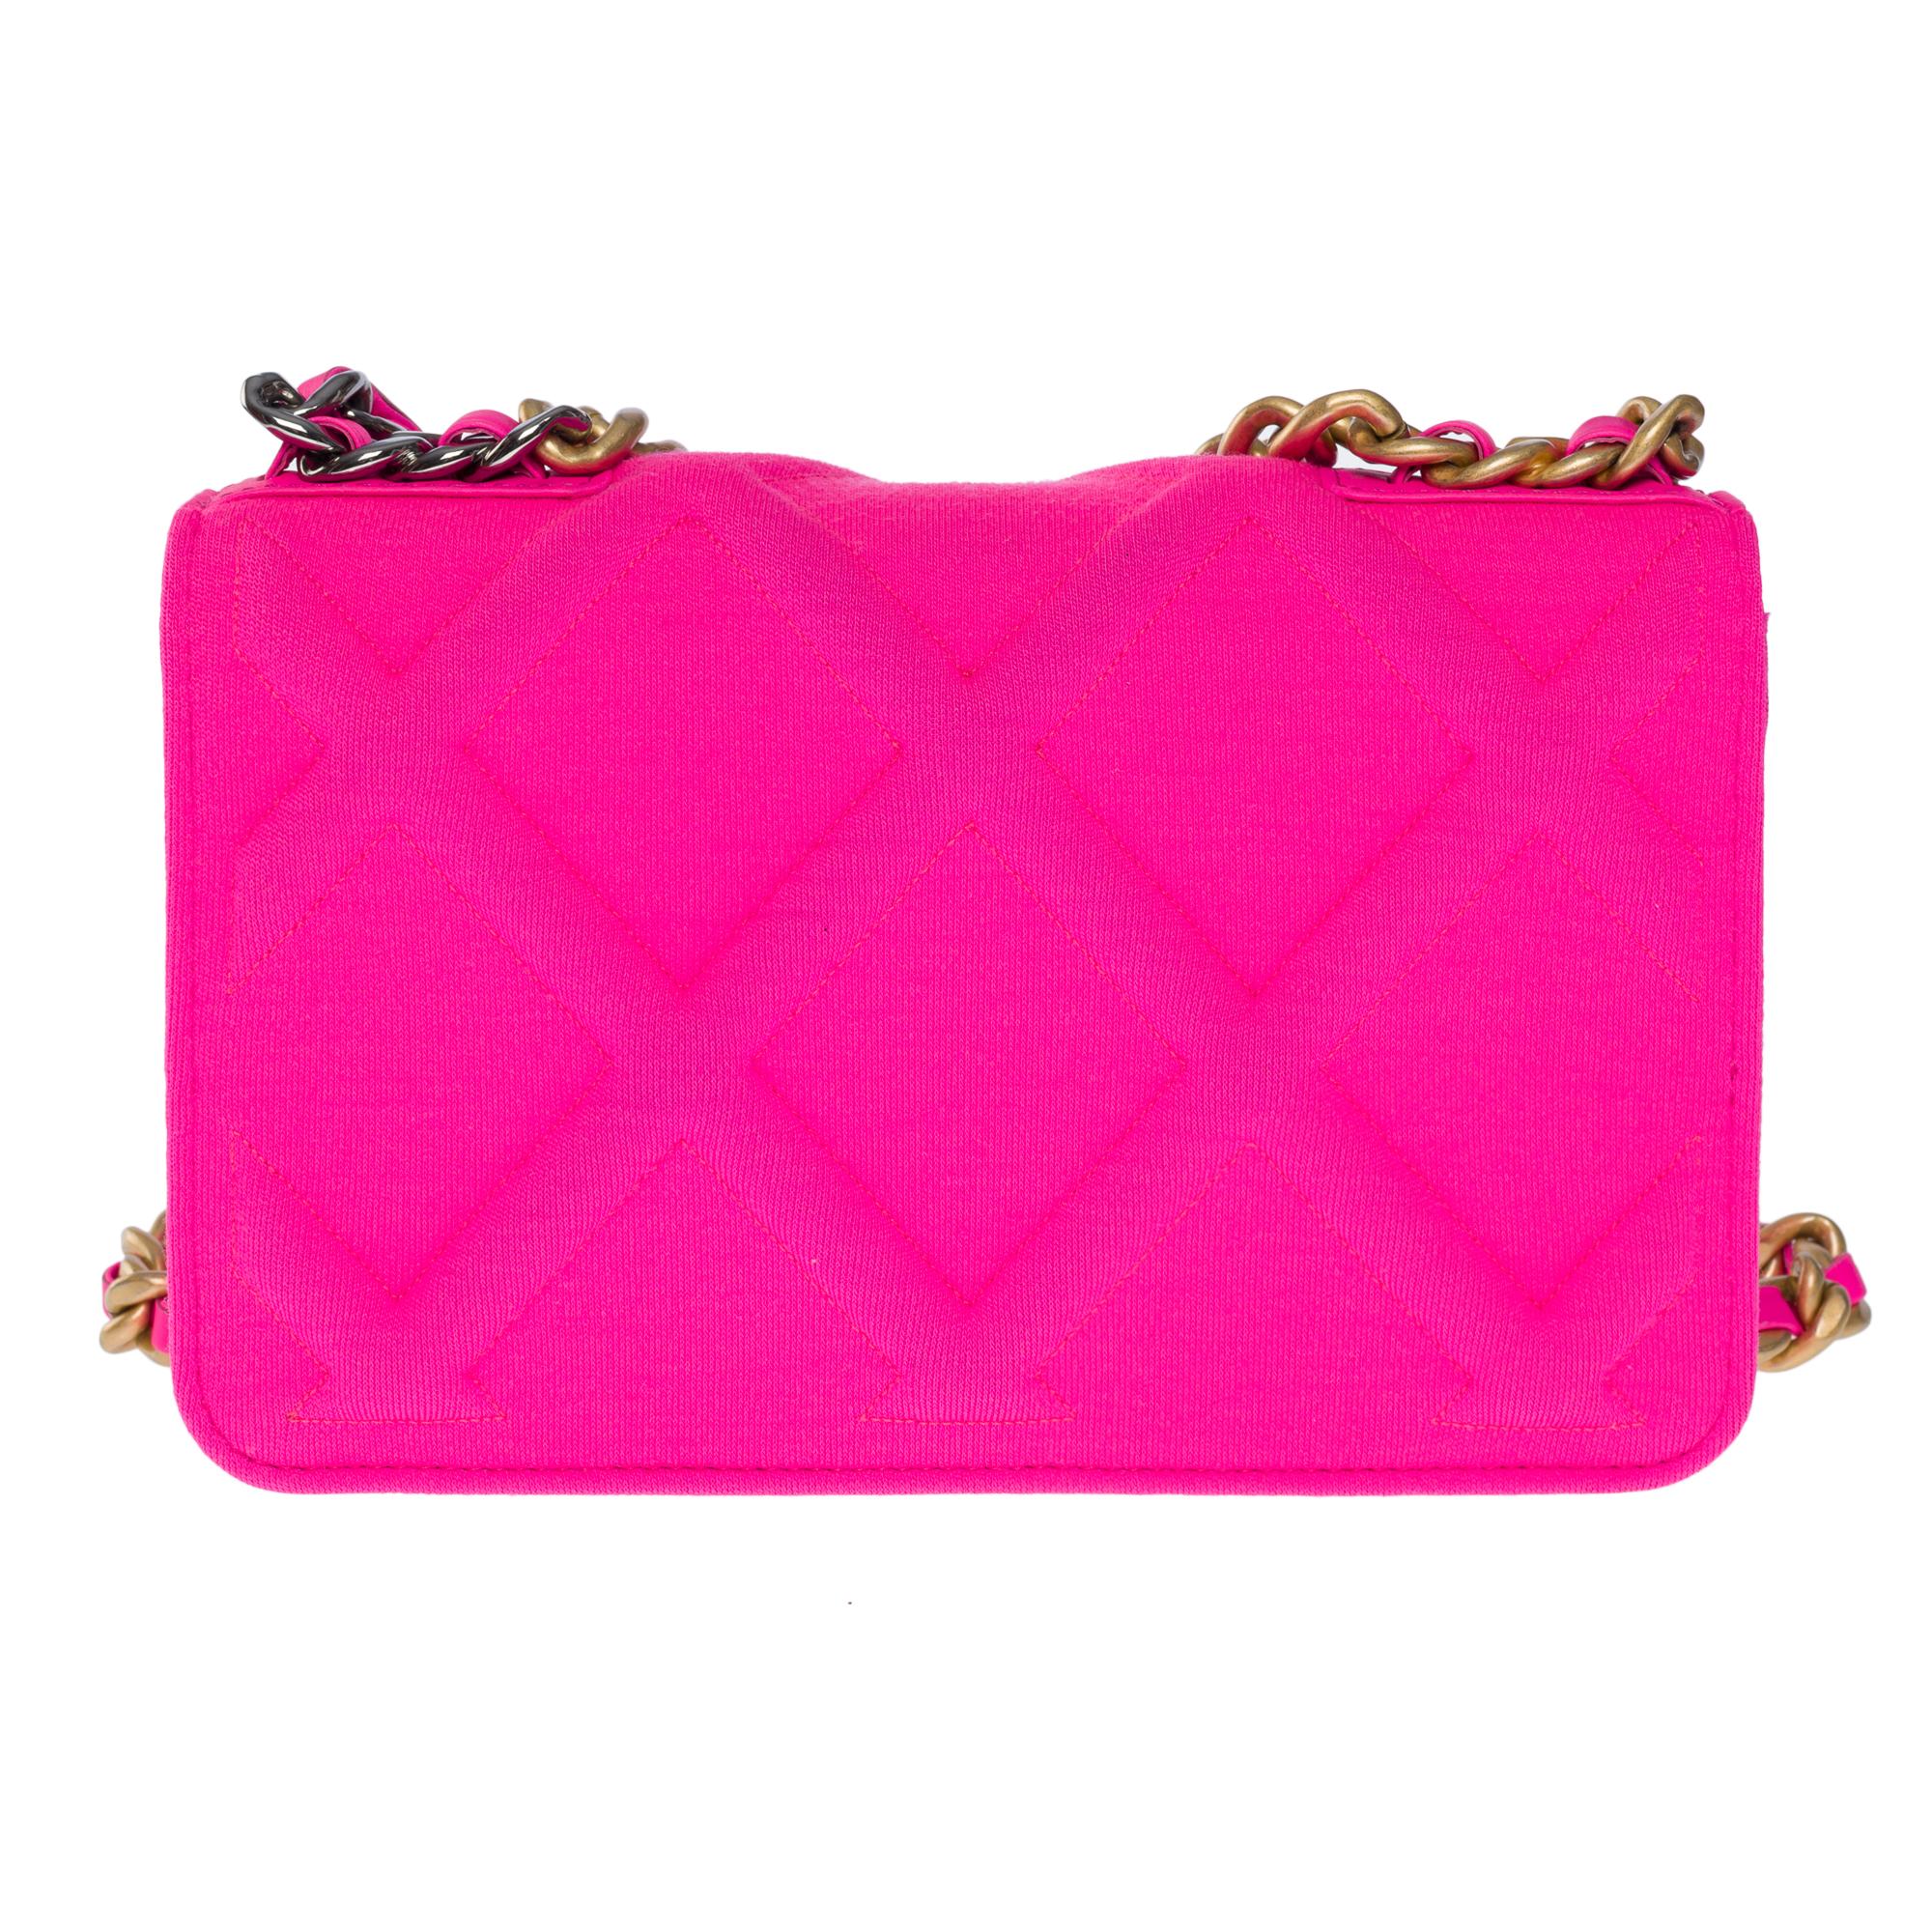 Lovely Chanel 19 Wallet On Chain (WOC) shoulder bag in pink quilted cotton canvas, gold and ruthenium metal hardware, matte gold metal handle, a gold and silver chain handle interwoven with pink leather for a hand or shoulder strap
A fastener in